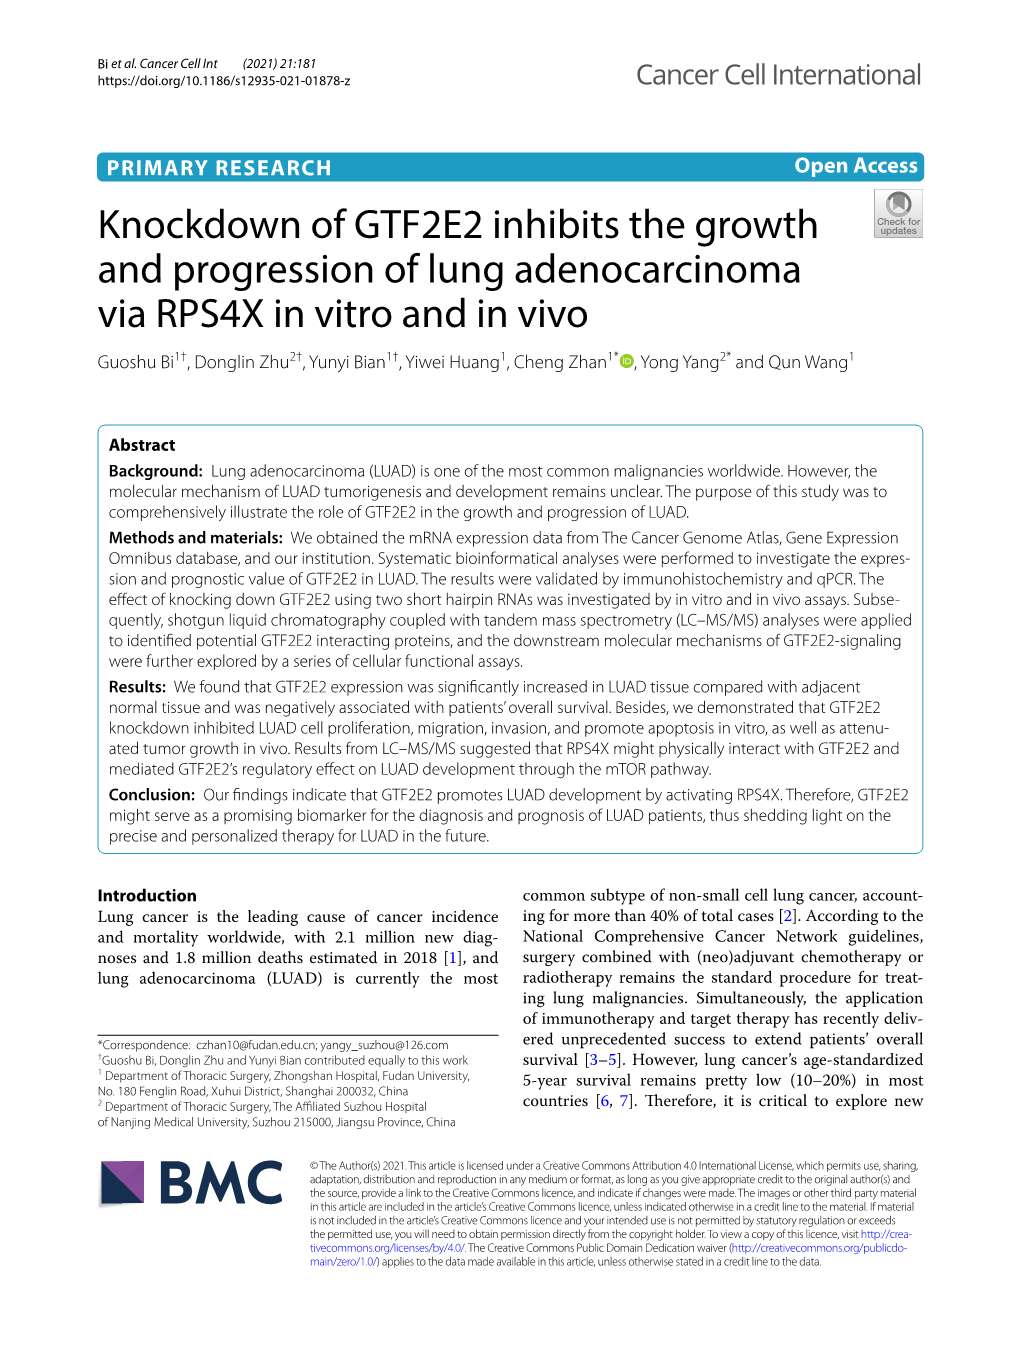 Knockdown of GTF2E2 Inhibits the Growth and Progression of Lung